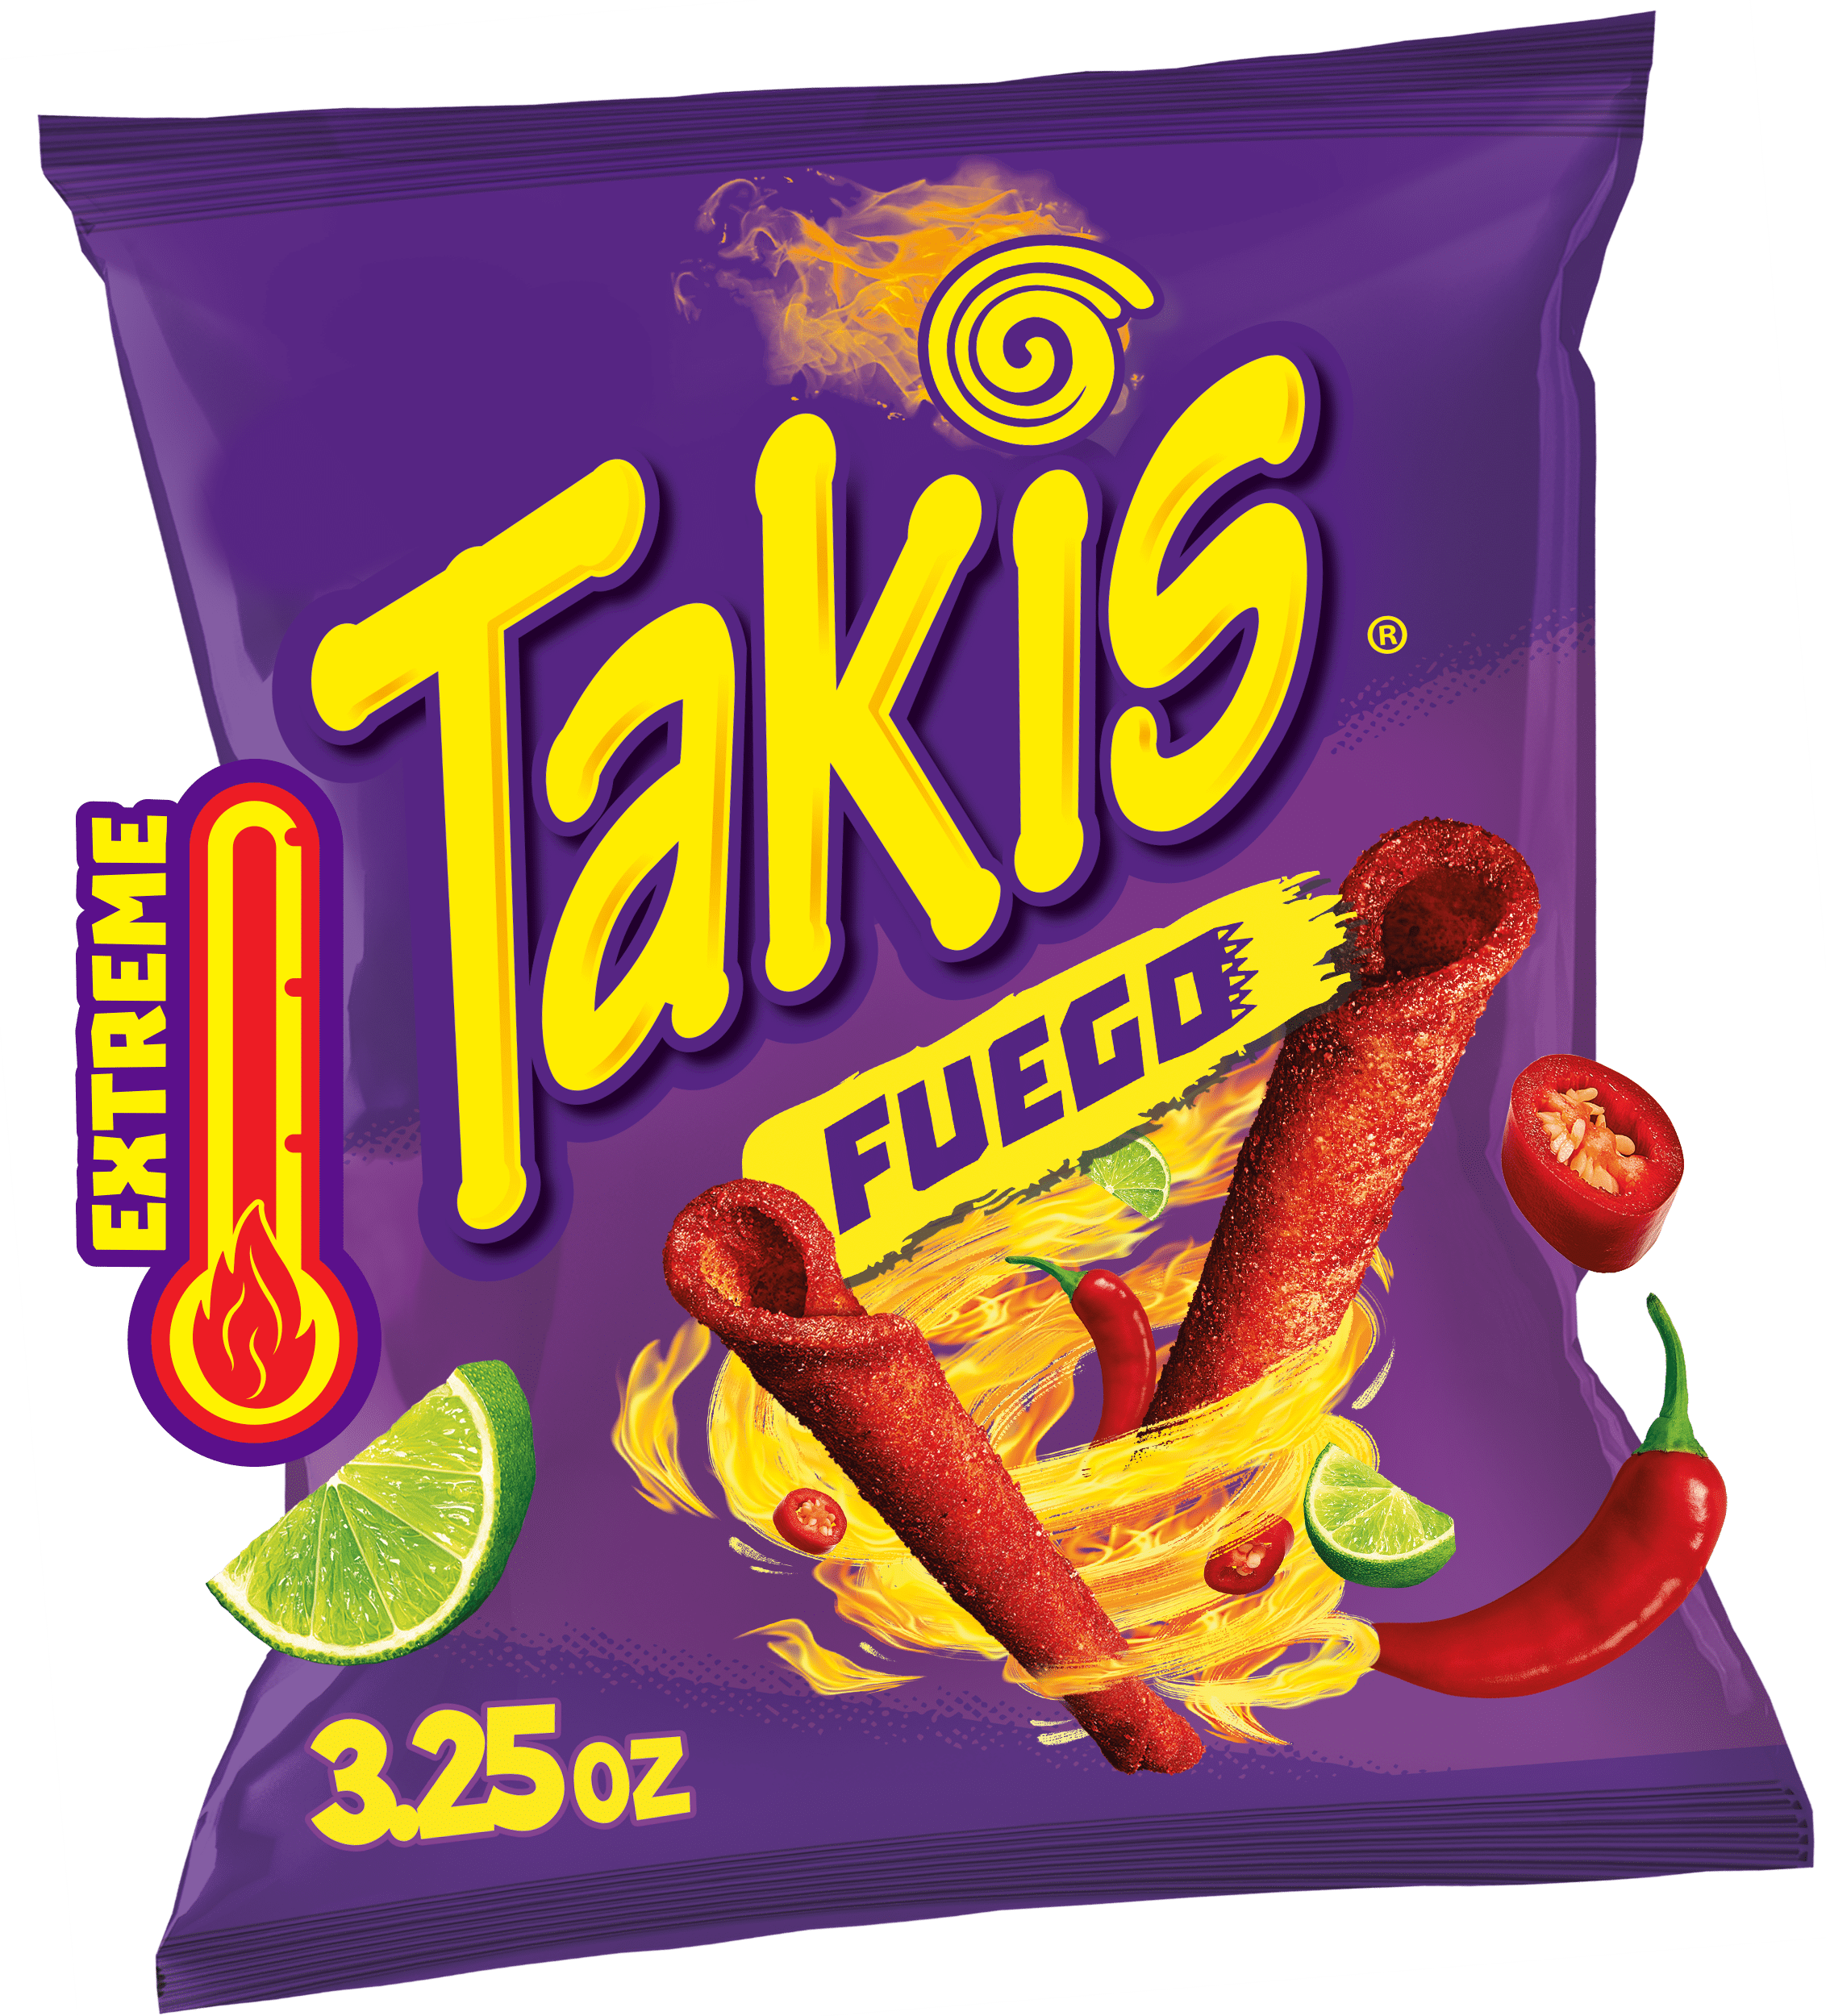 Takis Fuego Hot Chili Pepper and Lime Tortilla Chips 180g NEW